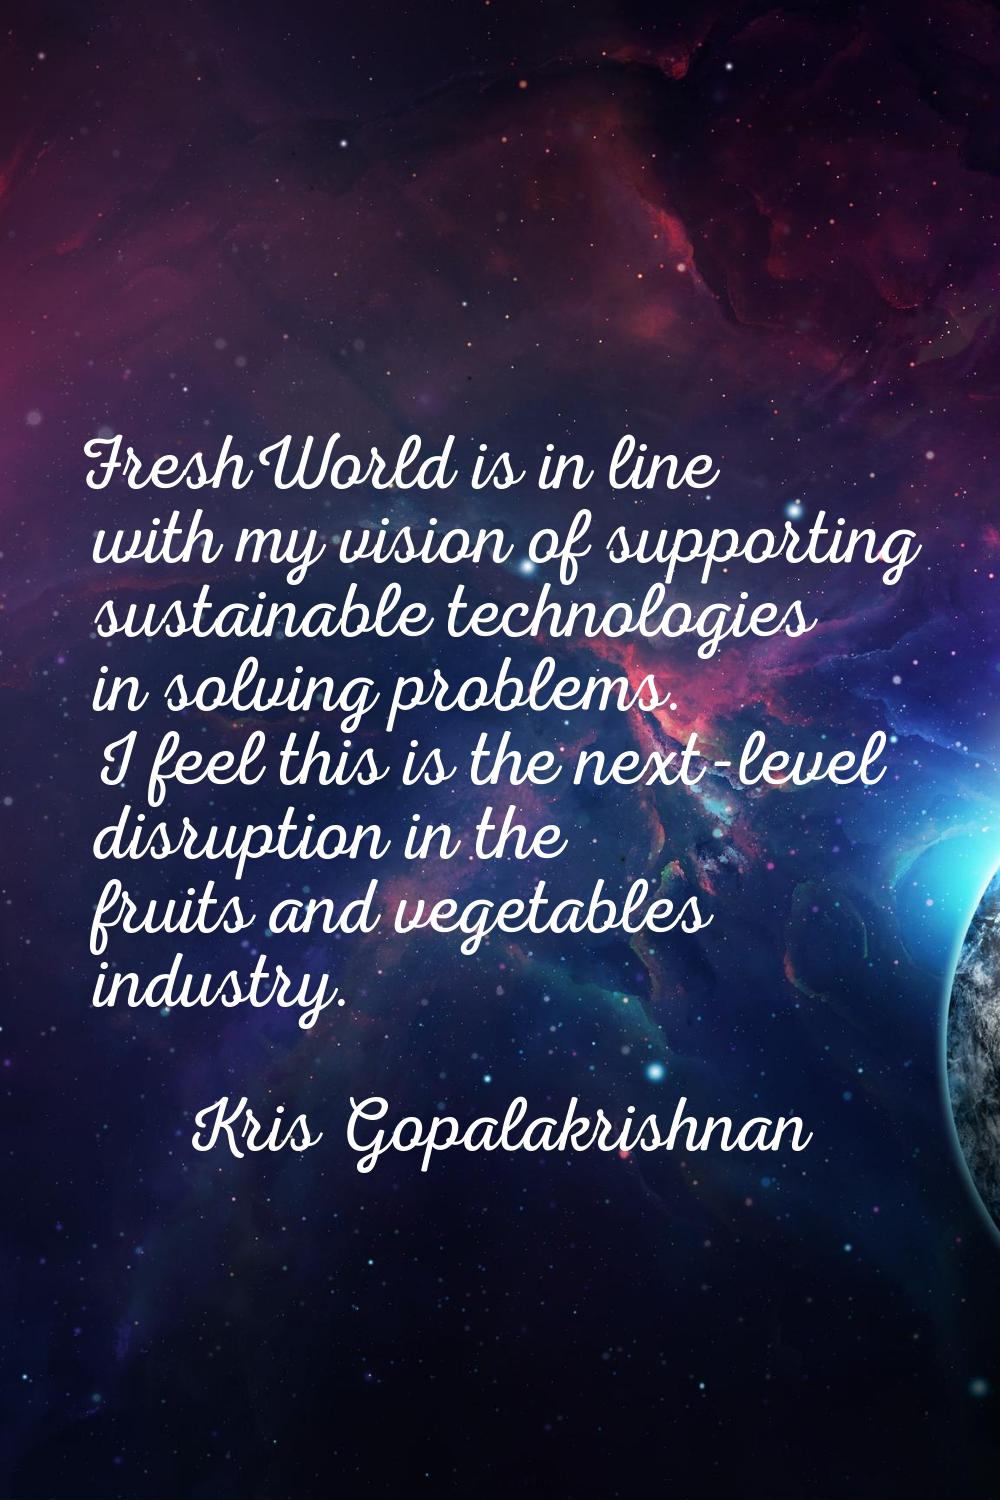 FreshWorld is in line with my vision of supporting sustainable technologies in solving problems. I 